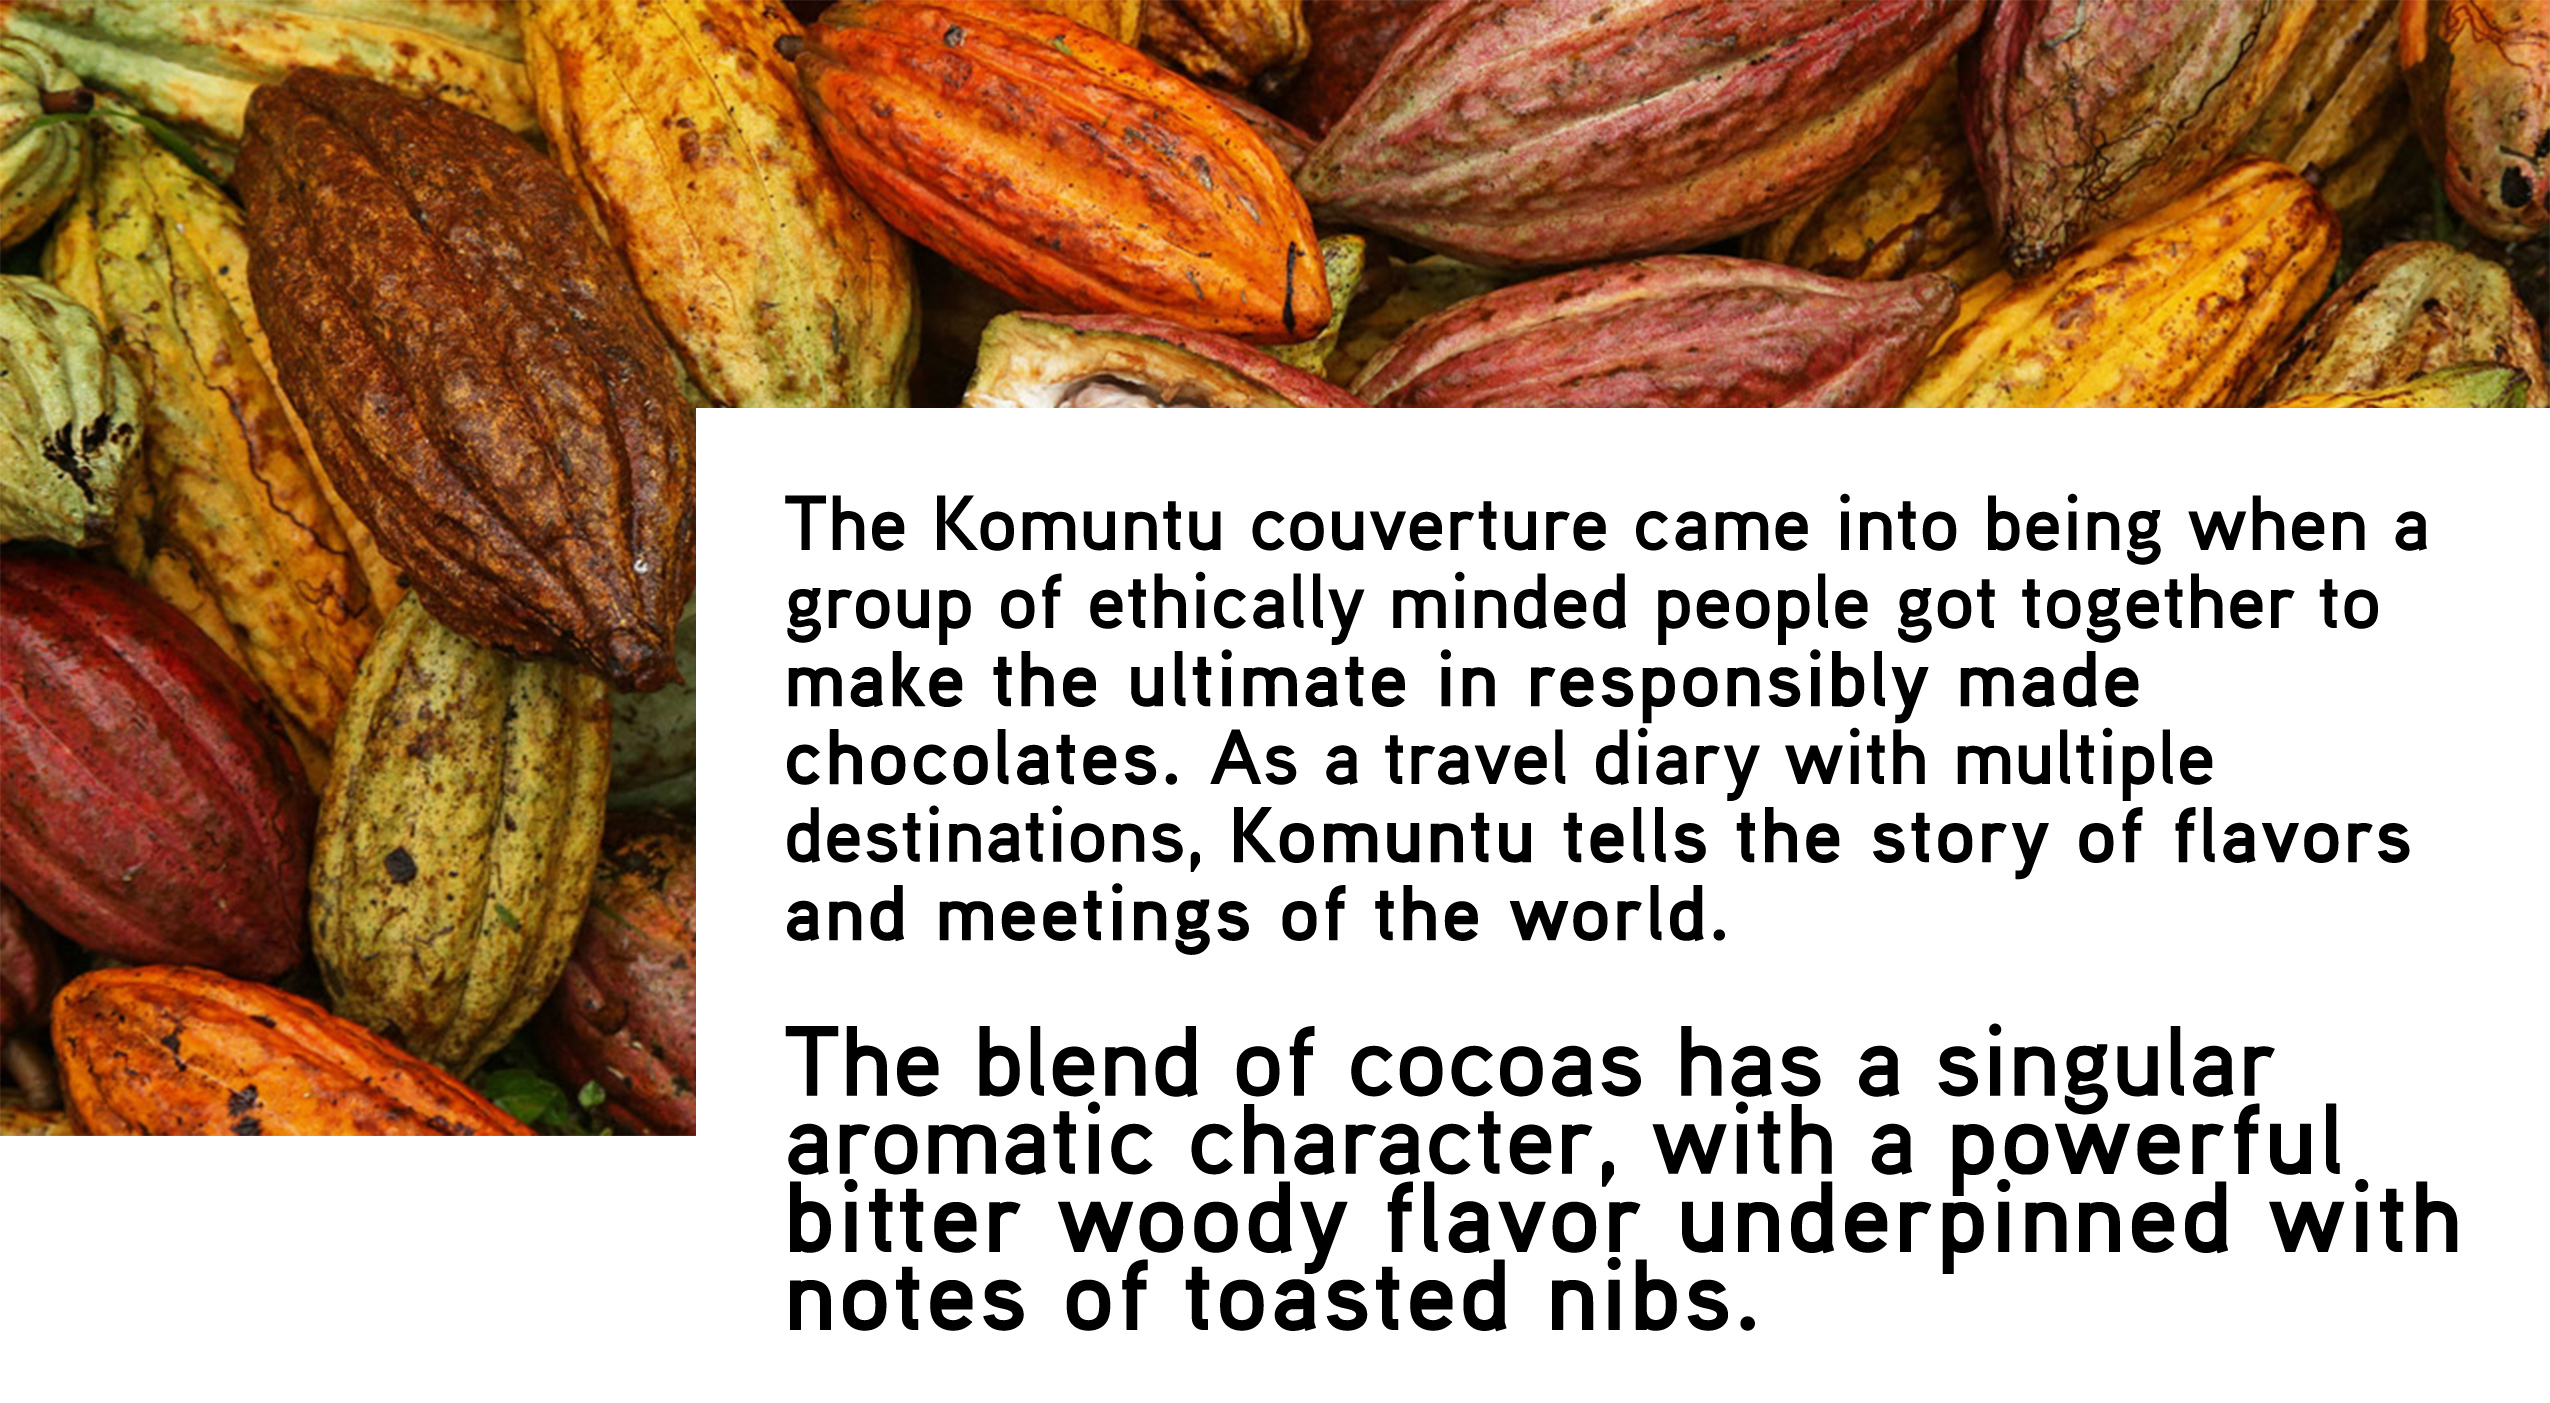 The Komuntu couverture came into being when a group of ethically minded people got together to make the ultimate in responsibly made chocolates. As a travel diary with multiple destinations, Komuntu tells the story of flavors and meetings of the world. The blend of cocoas has a singular aromatic character, with a powerful bitter woody flavor underpinned with notes of toasted nibs. 
